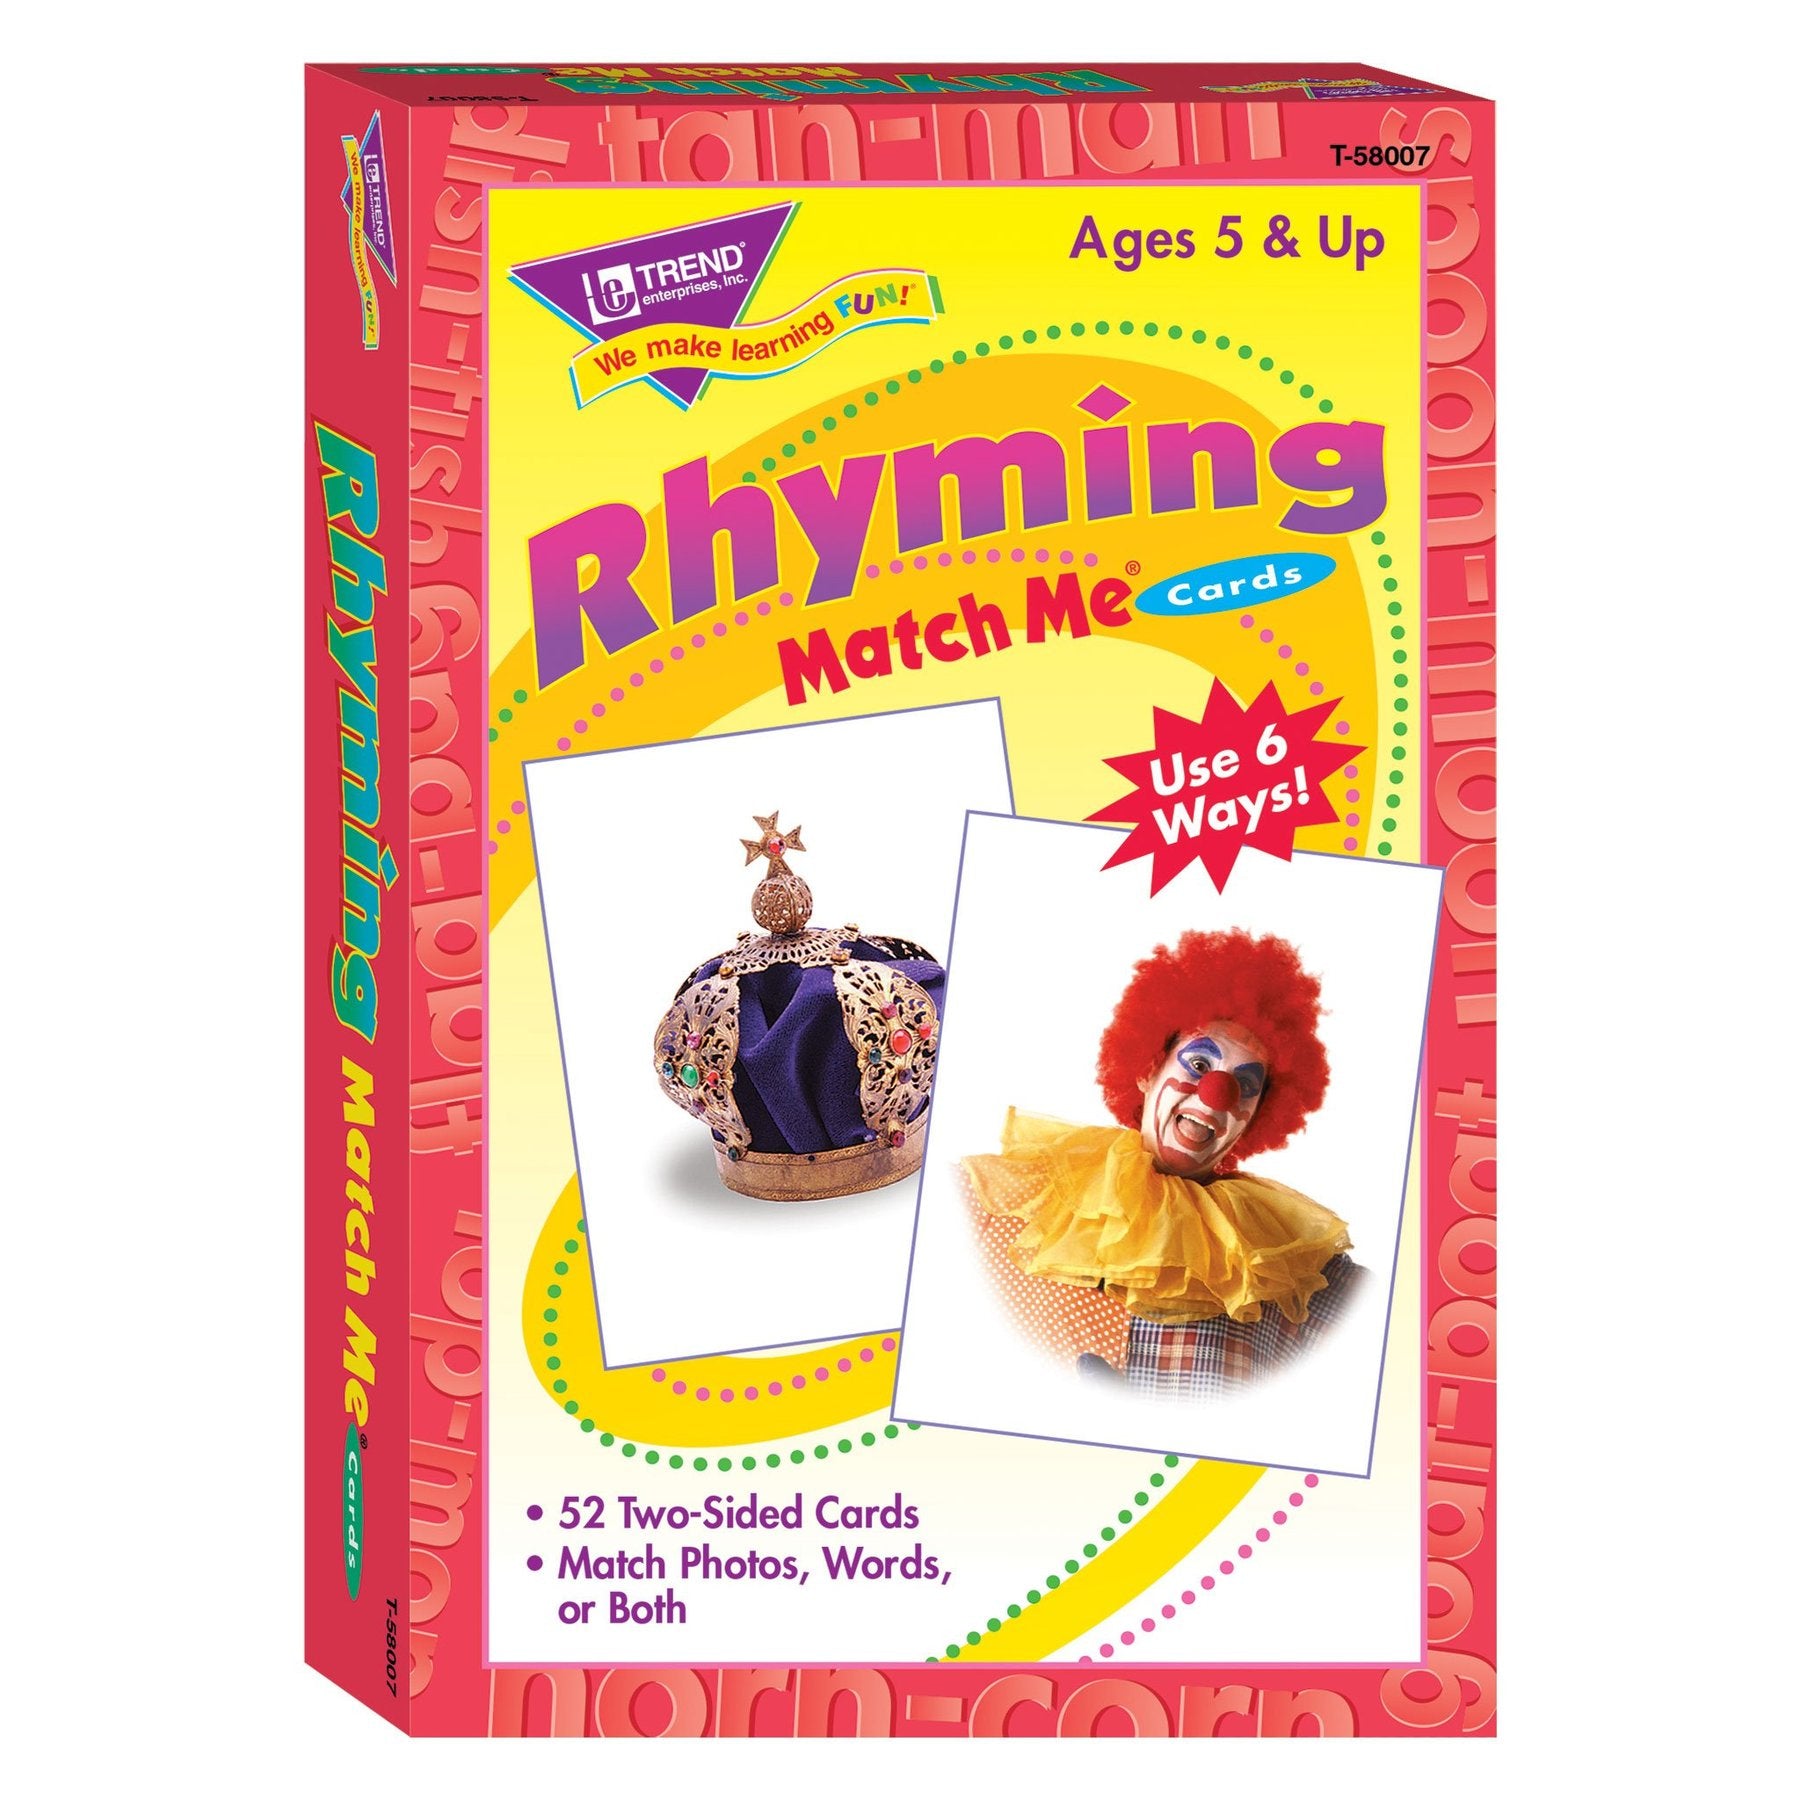 Rhyming Words Match Me® Cards